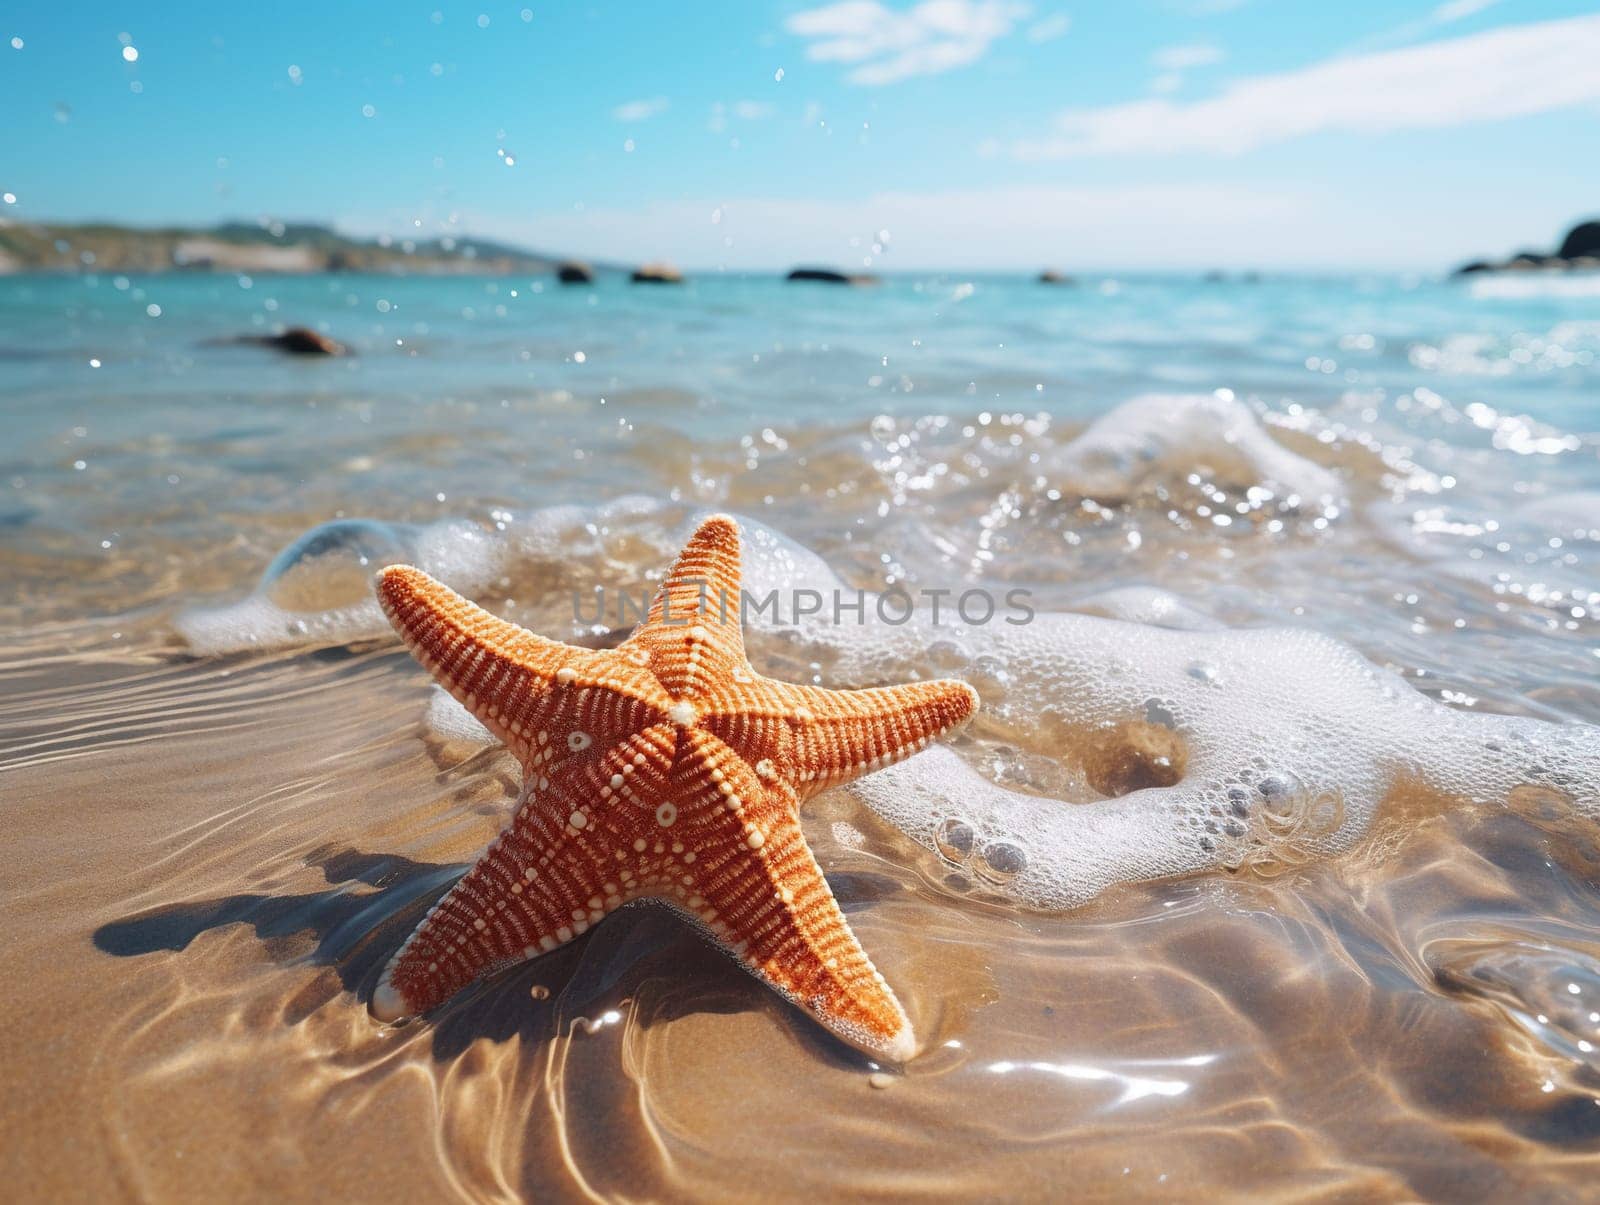 Starfish on the beach in the spray of sea waves.